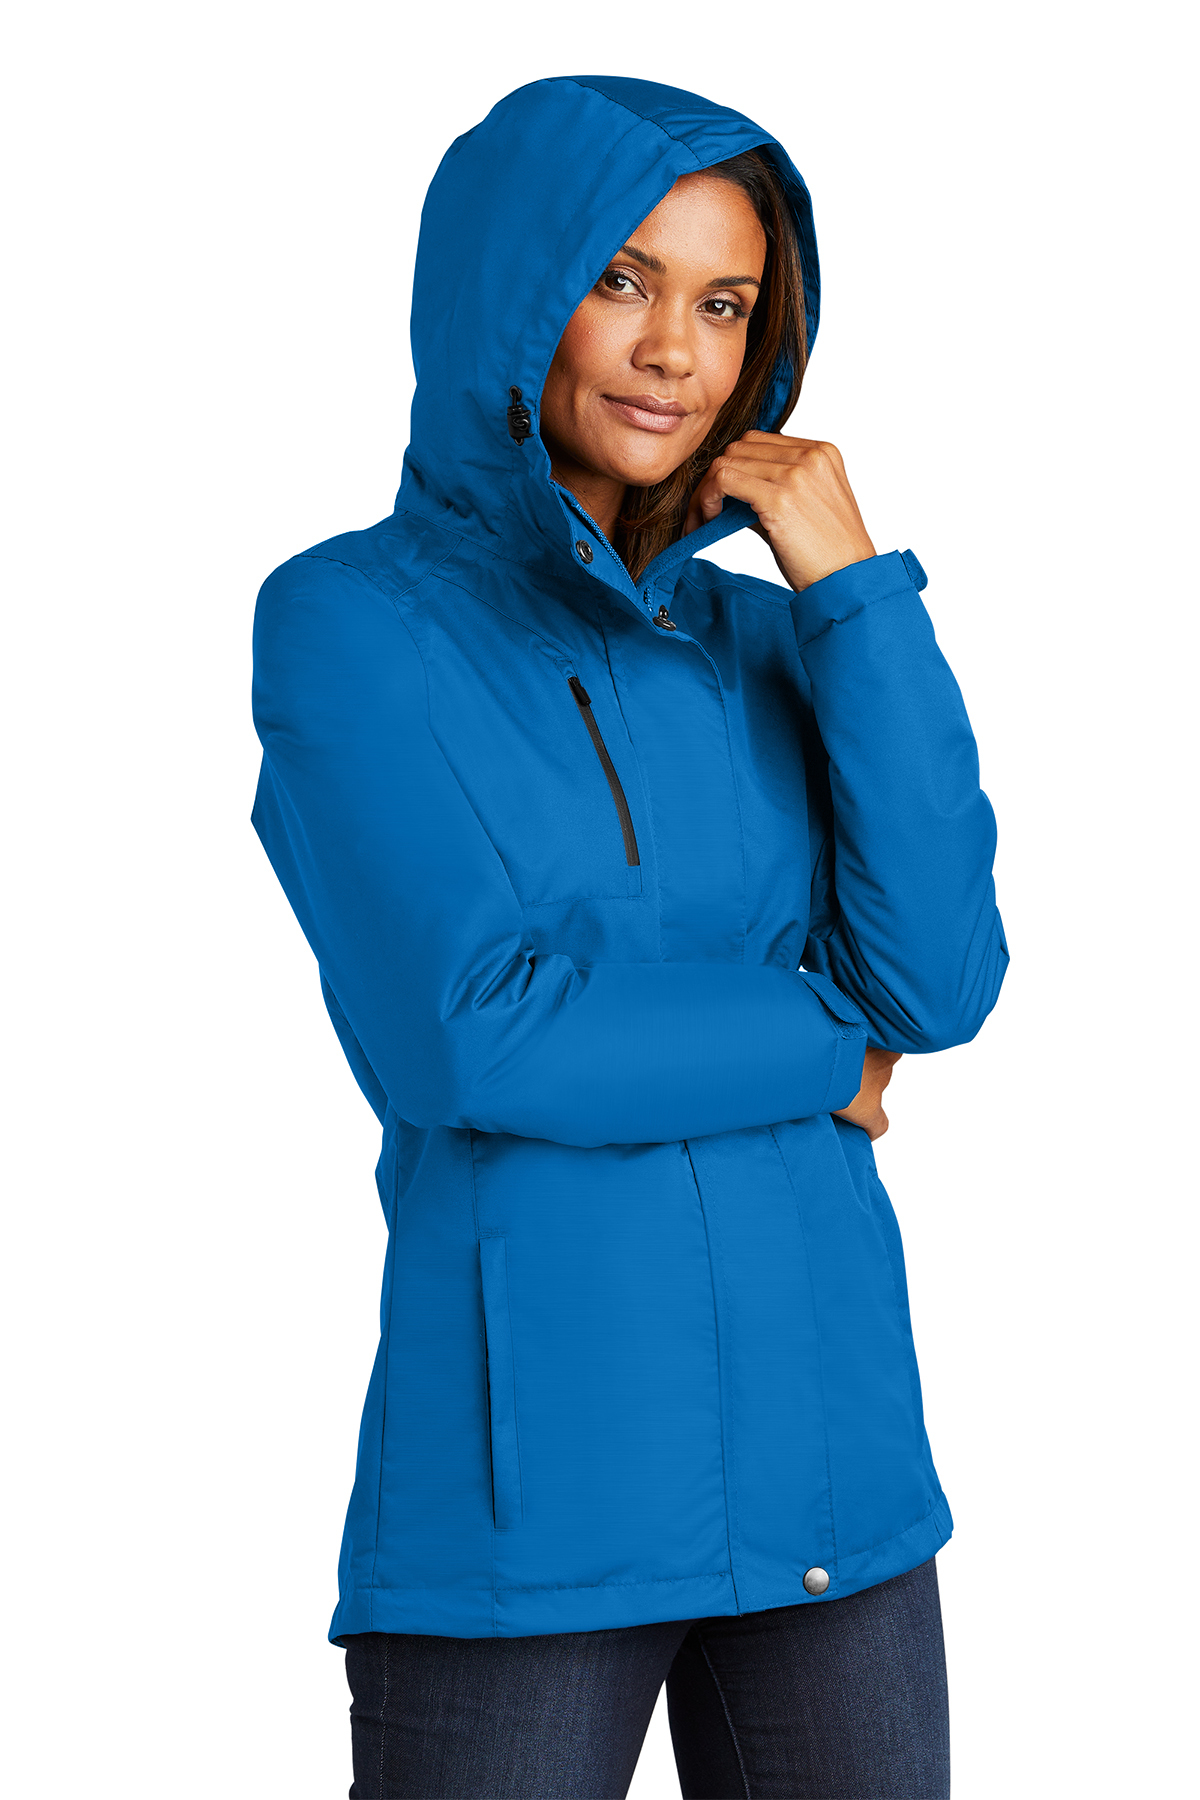 Port Authority Ladies All-Conditions Jacket | SanMar | Product